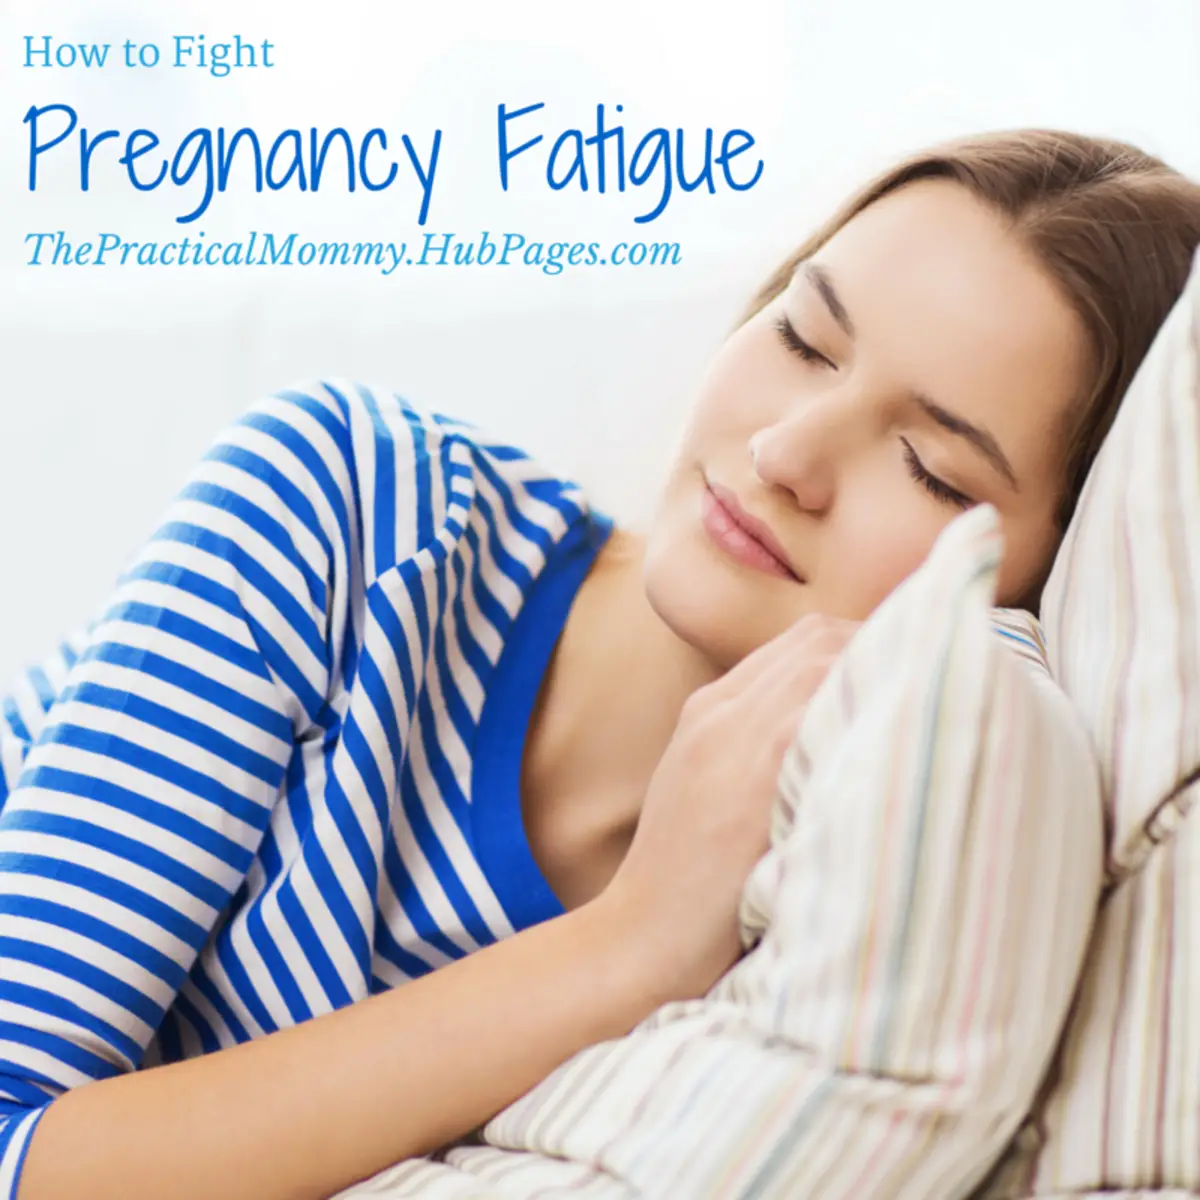 How to Fight Pregnancy Fatigue